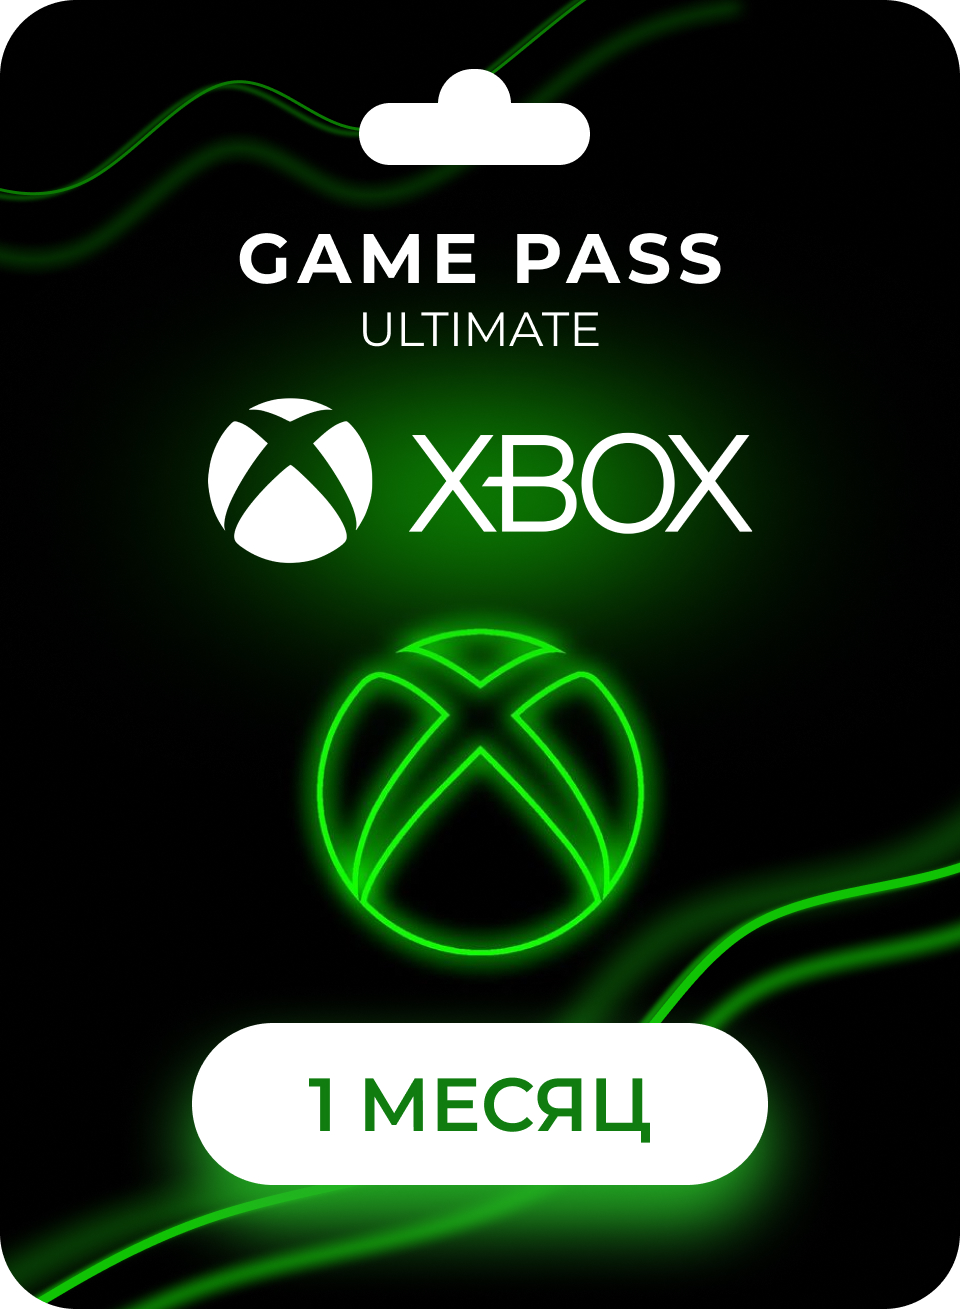 Xbox Game Pass Ultimate Live gold + Game pass 14 Days INSTANT Delivery 24/7